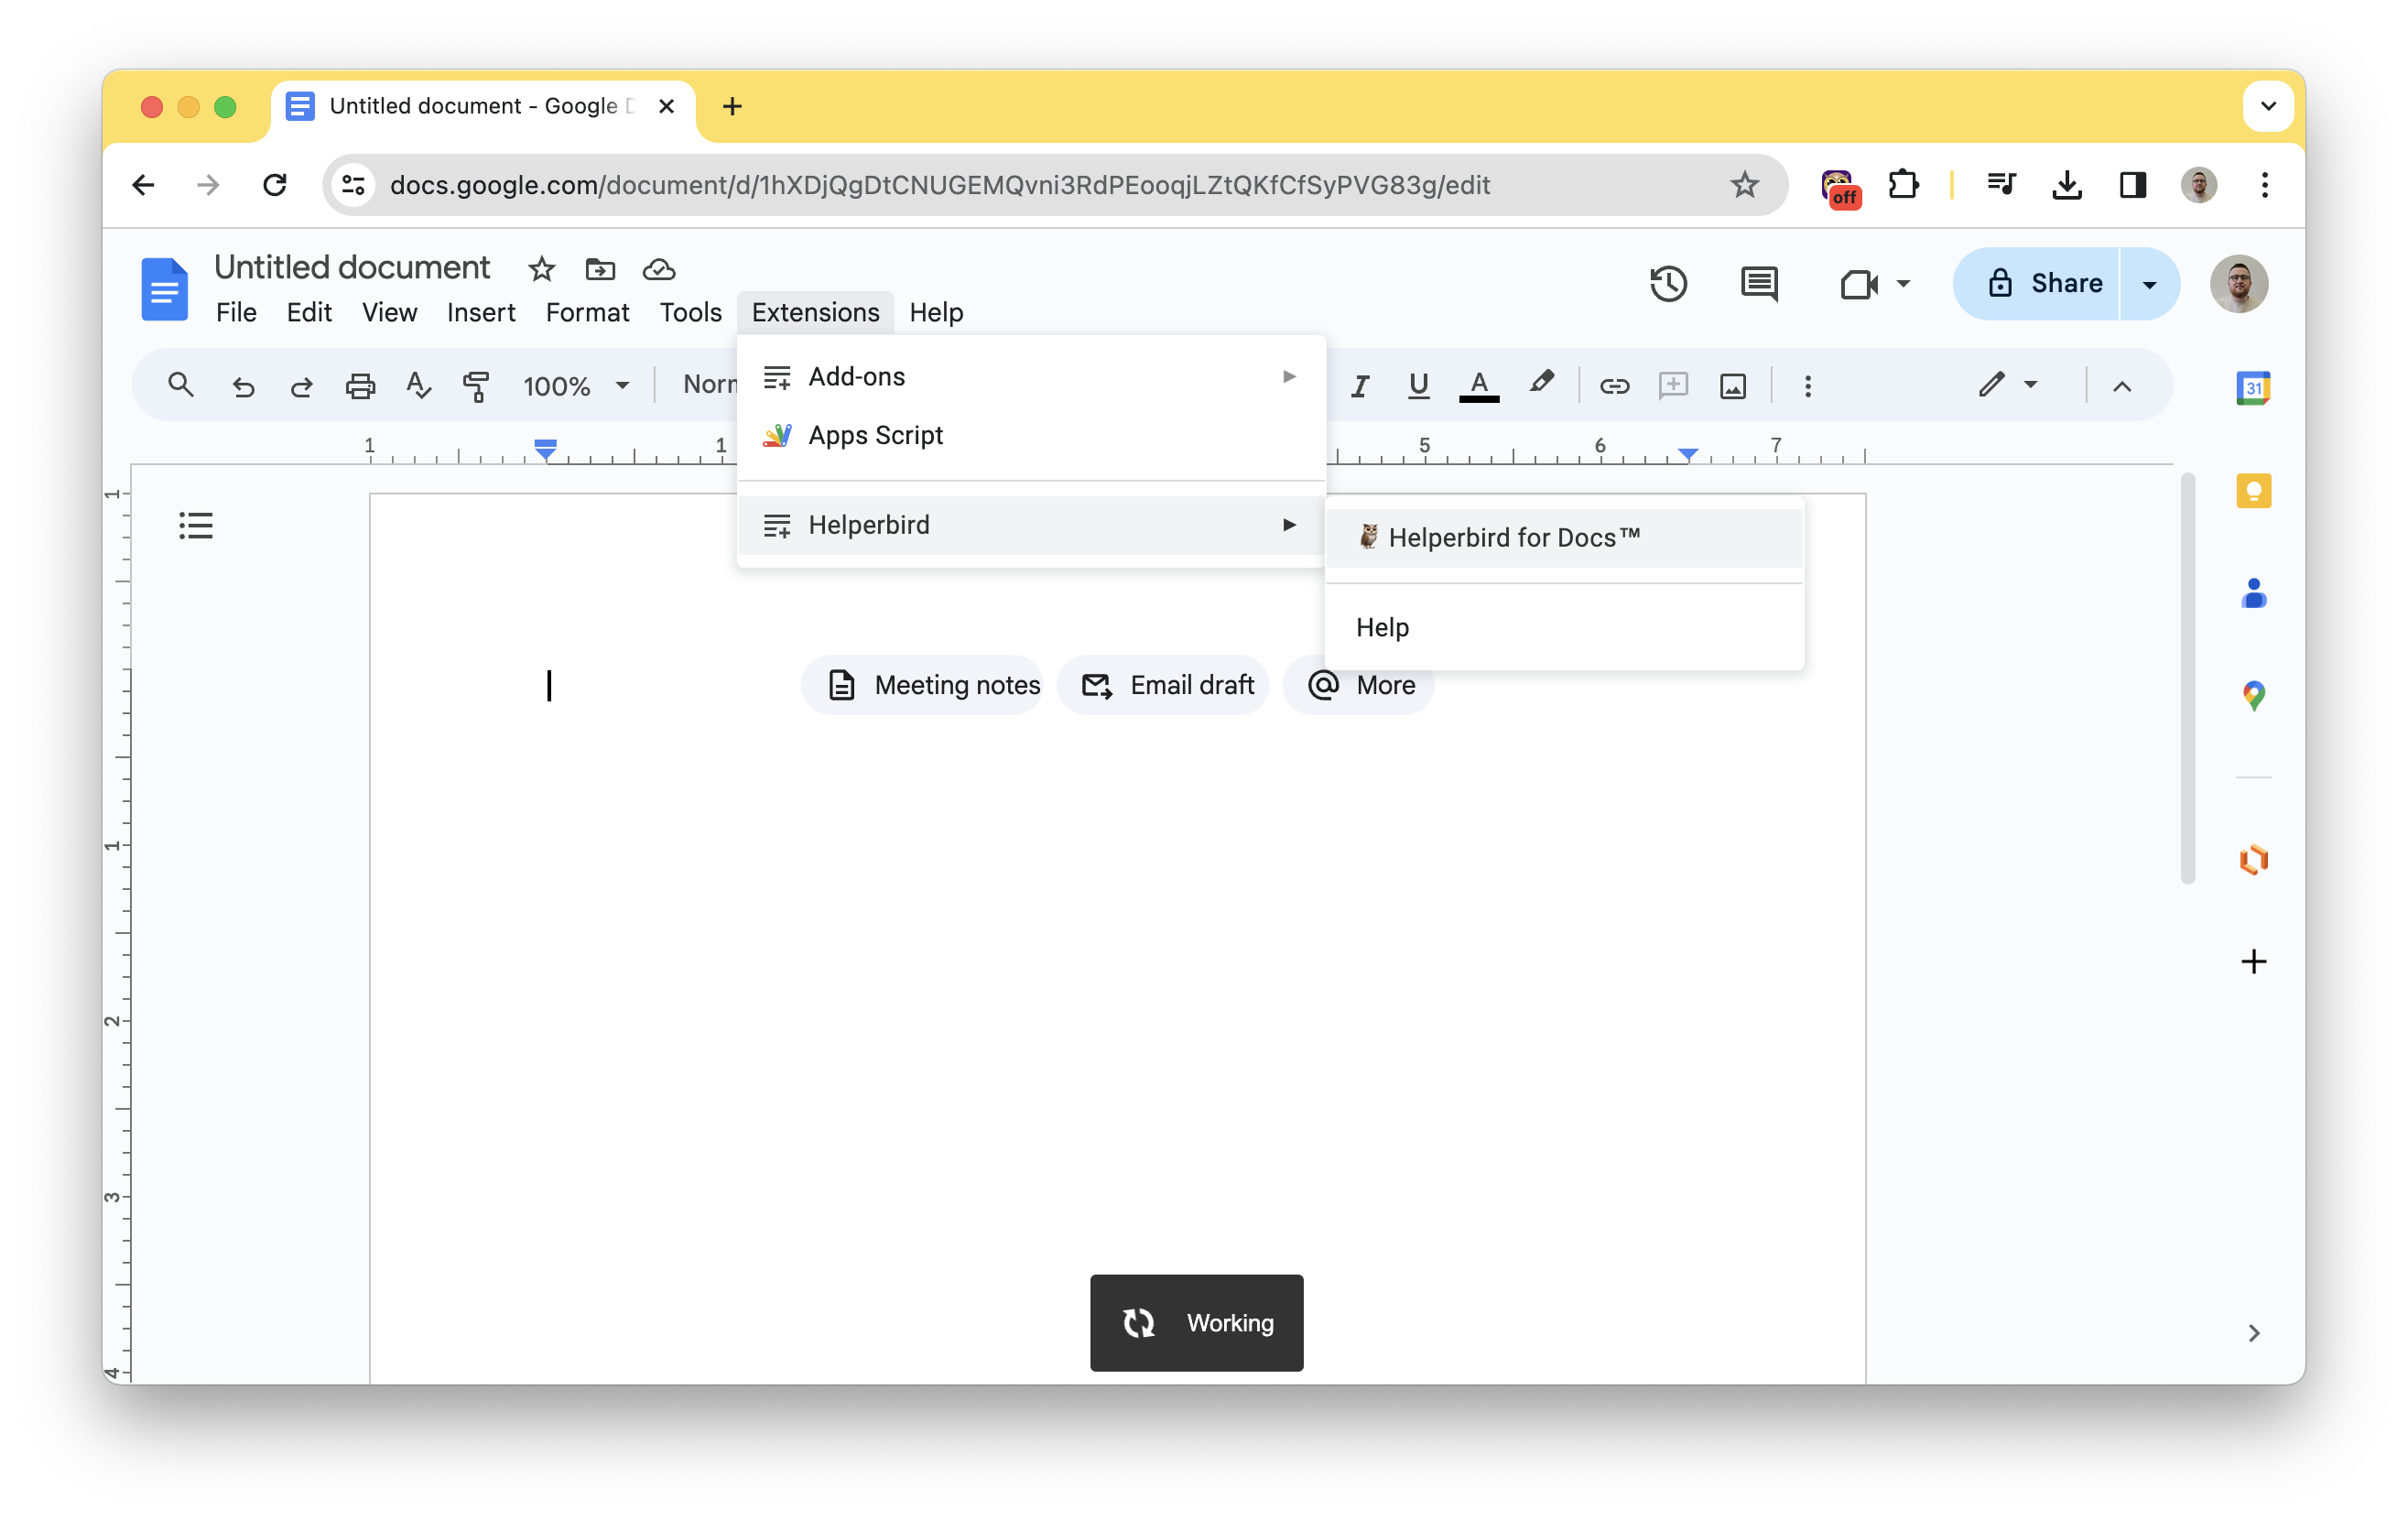 How to Use Immersive Reader in Google Docs, Step-by-Step Guide